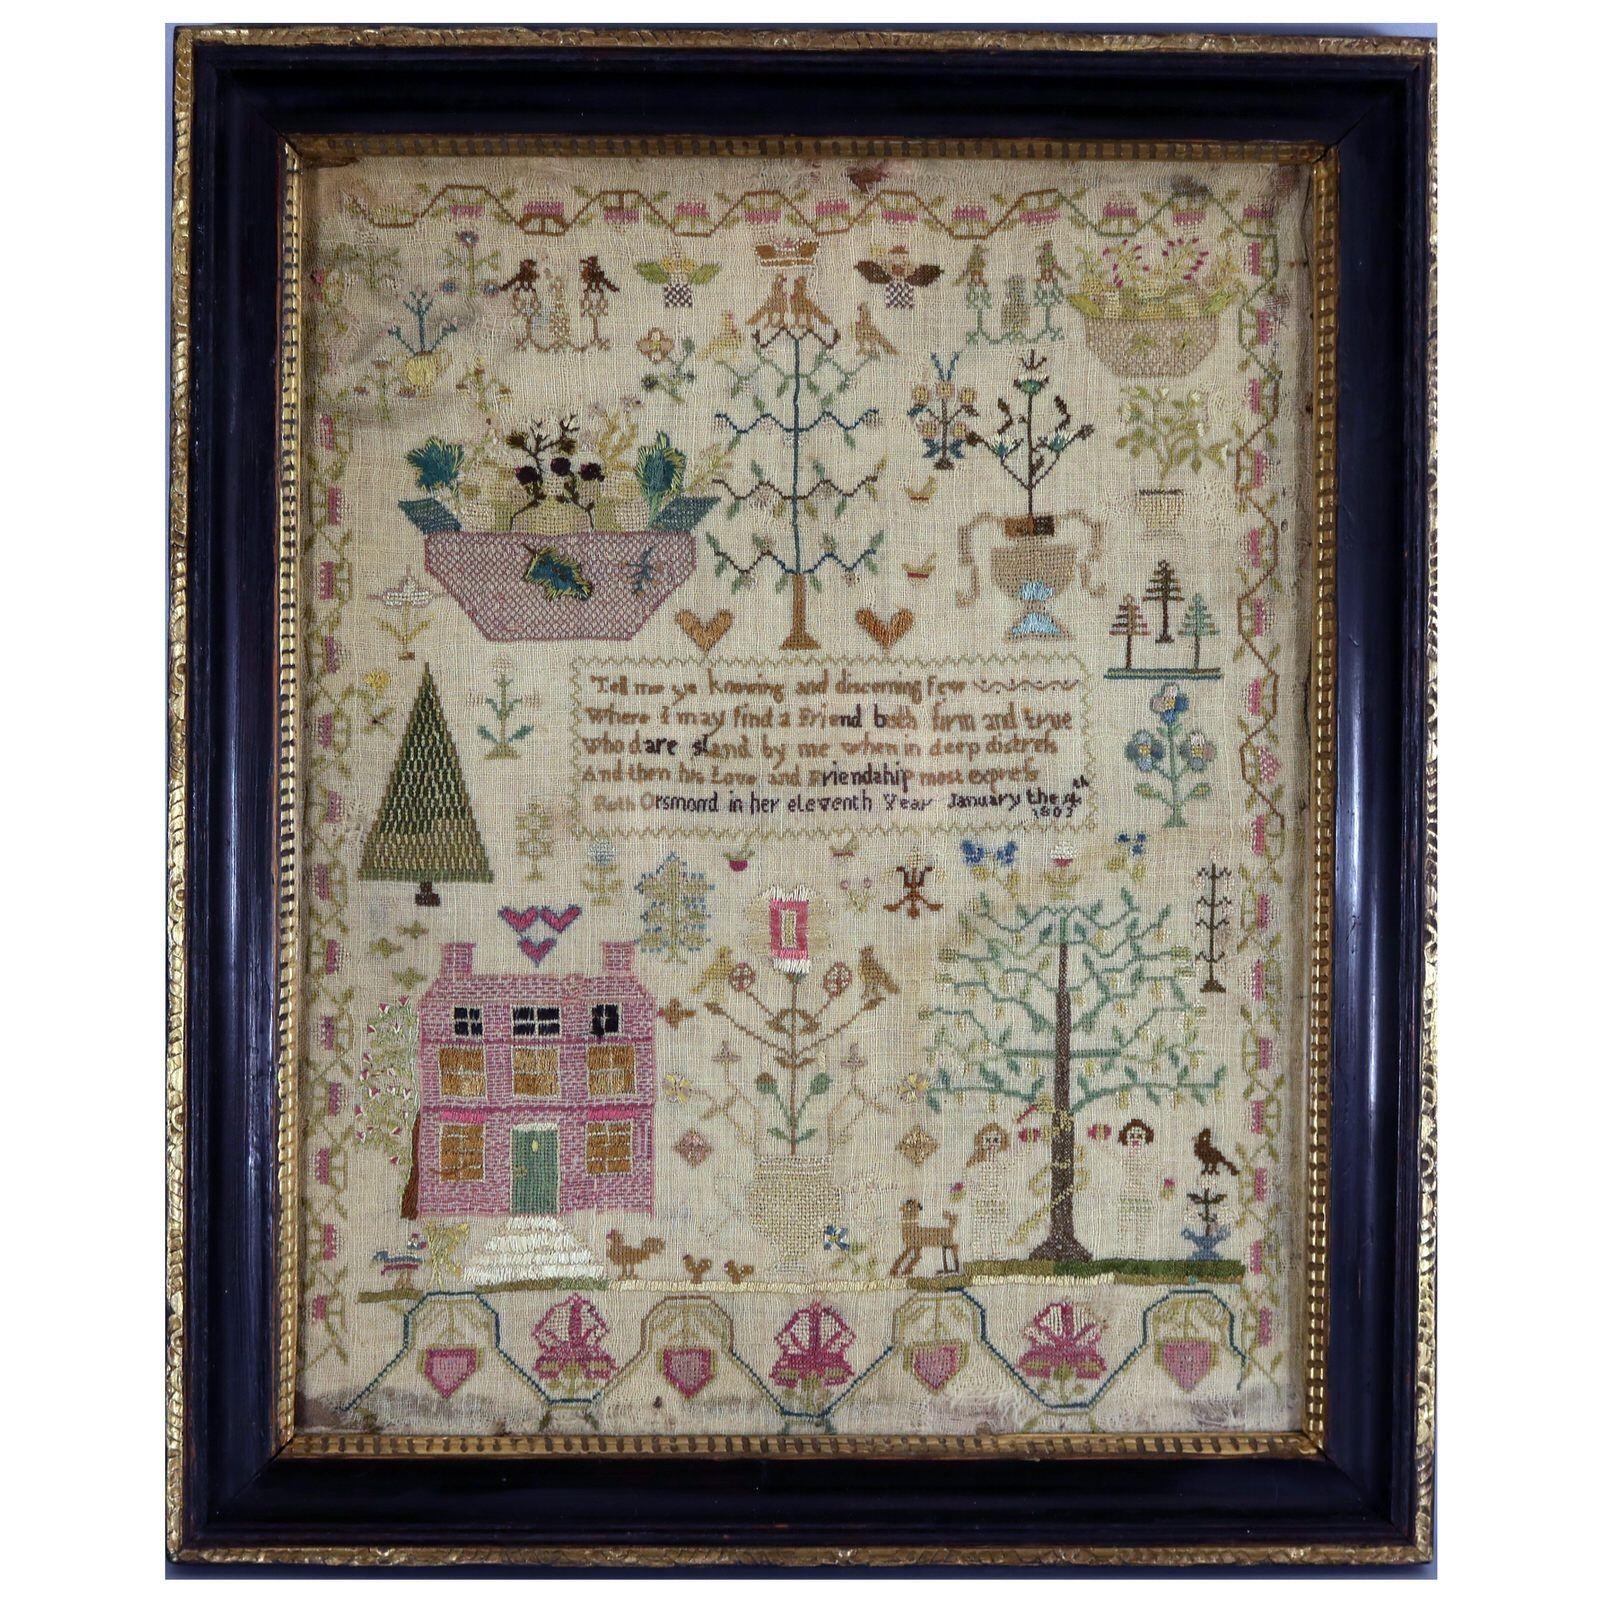 Pair Georgian Samplers, worked in 1803 by Ruth Orsmond. Both examples are worked in silk threads on a linen ground, mainly in cross stitch. The example with a house has a Meandering strawberry border. Colours green, dark brown, copper, gold, black,